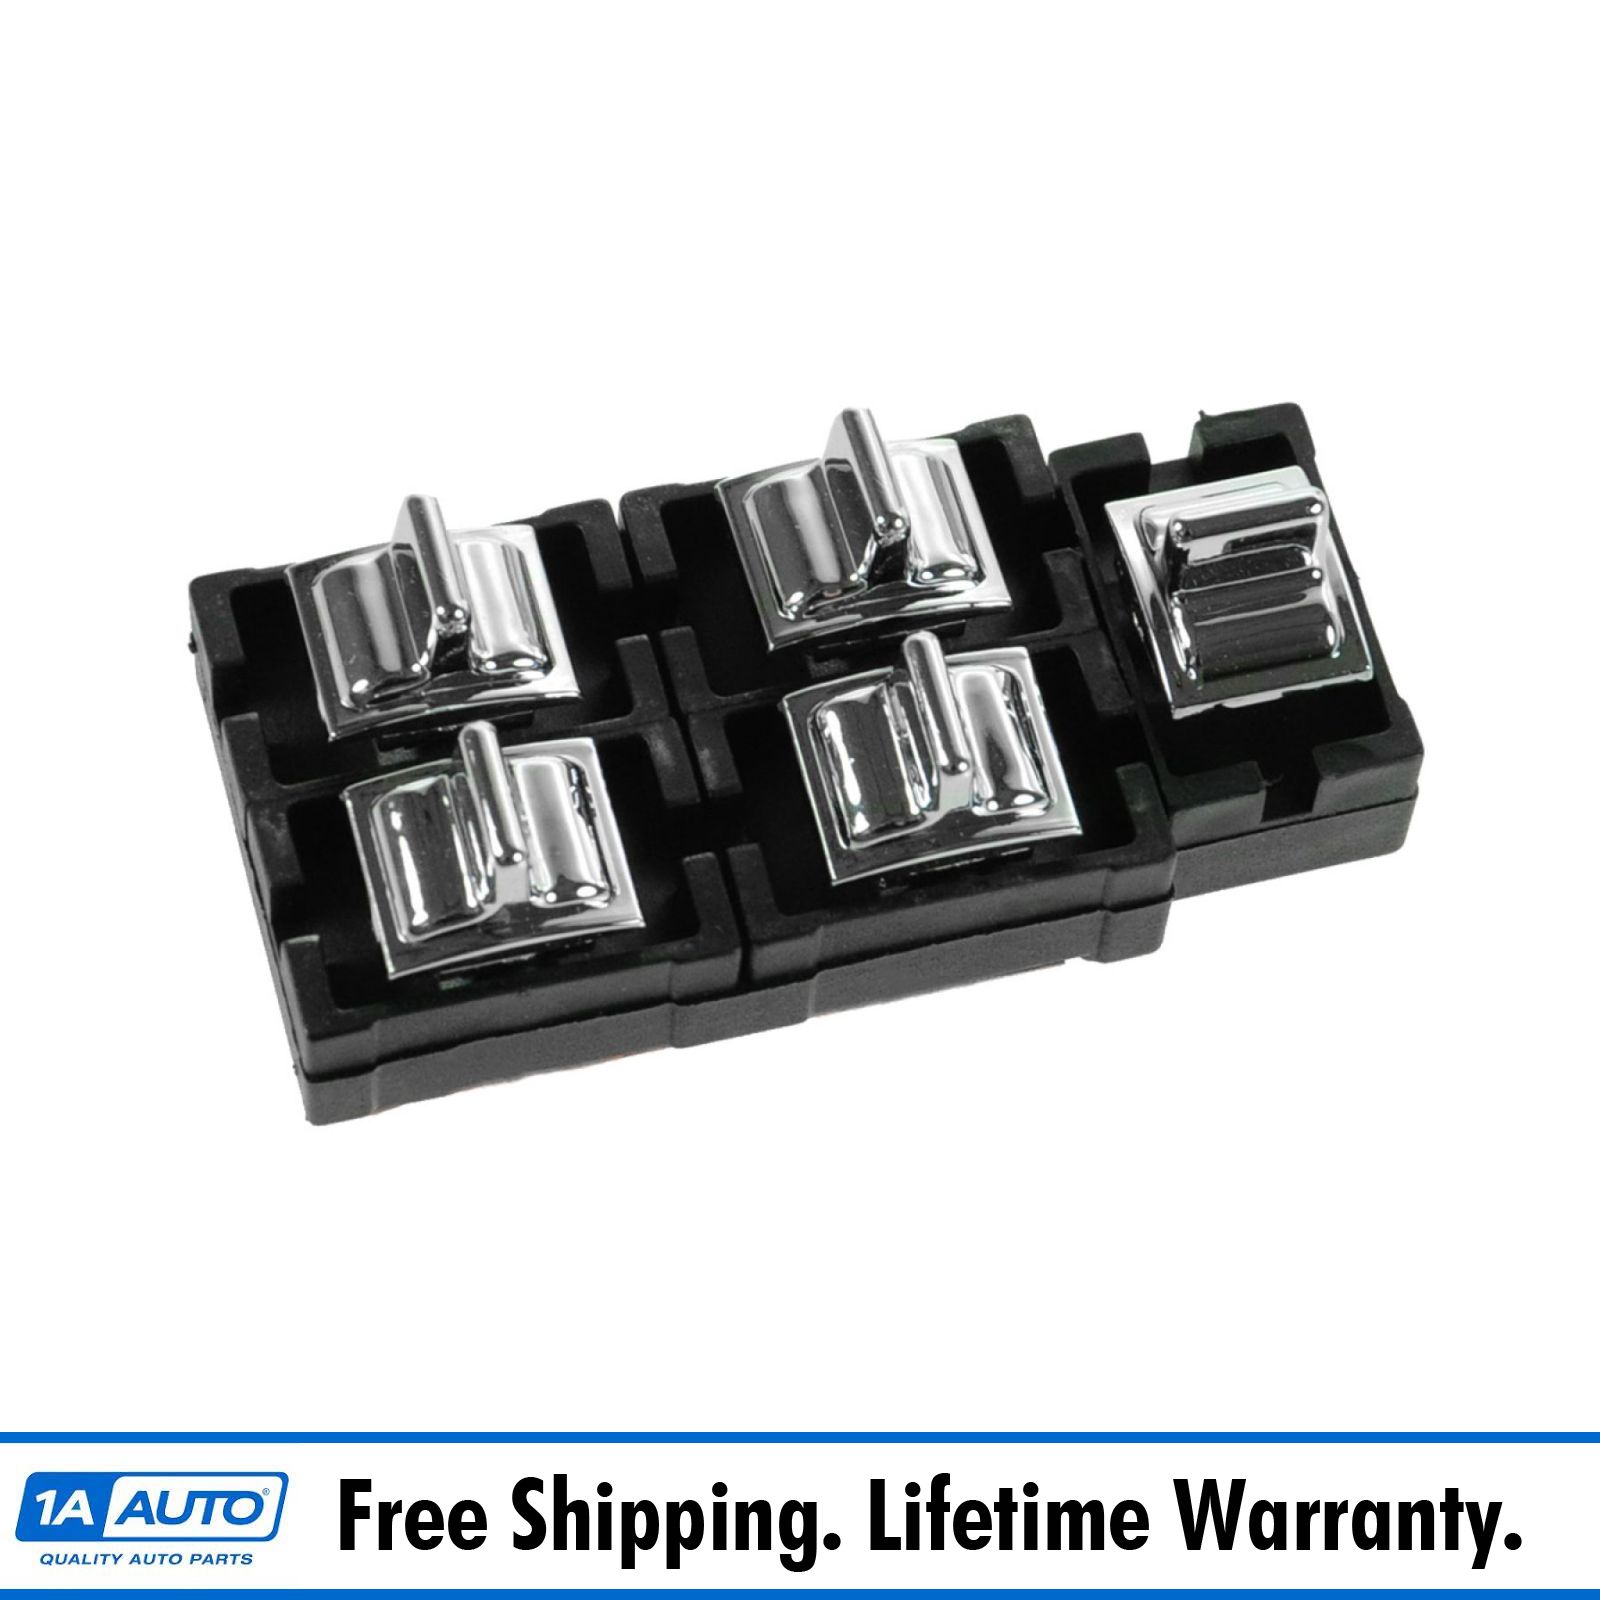 New Master Power Window Switch Driver Side Left LH for Ford F150 Truck Mercury